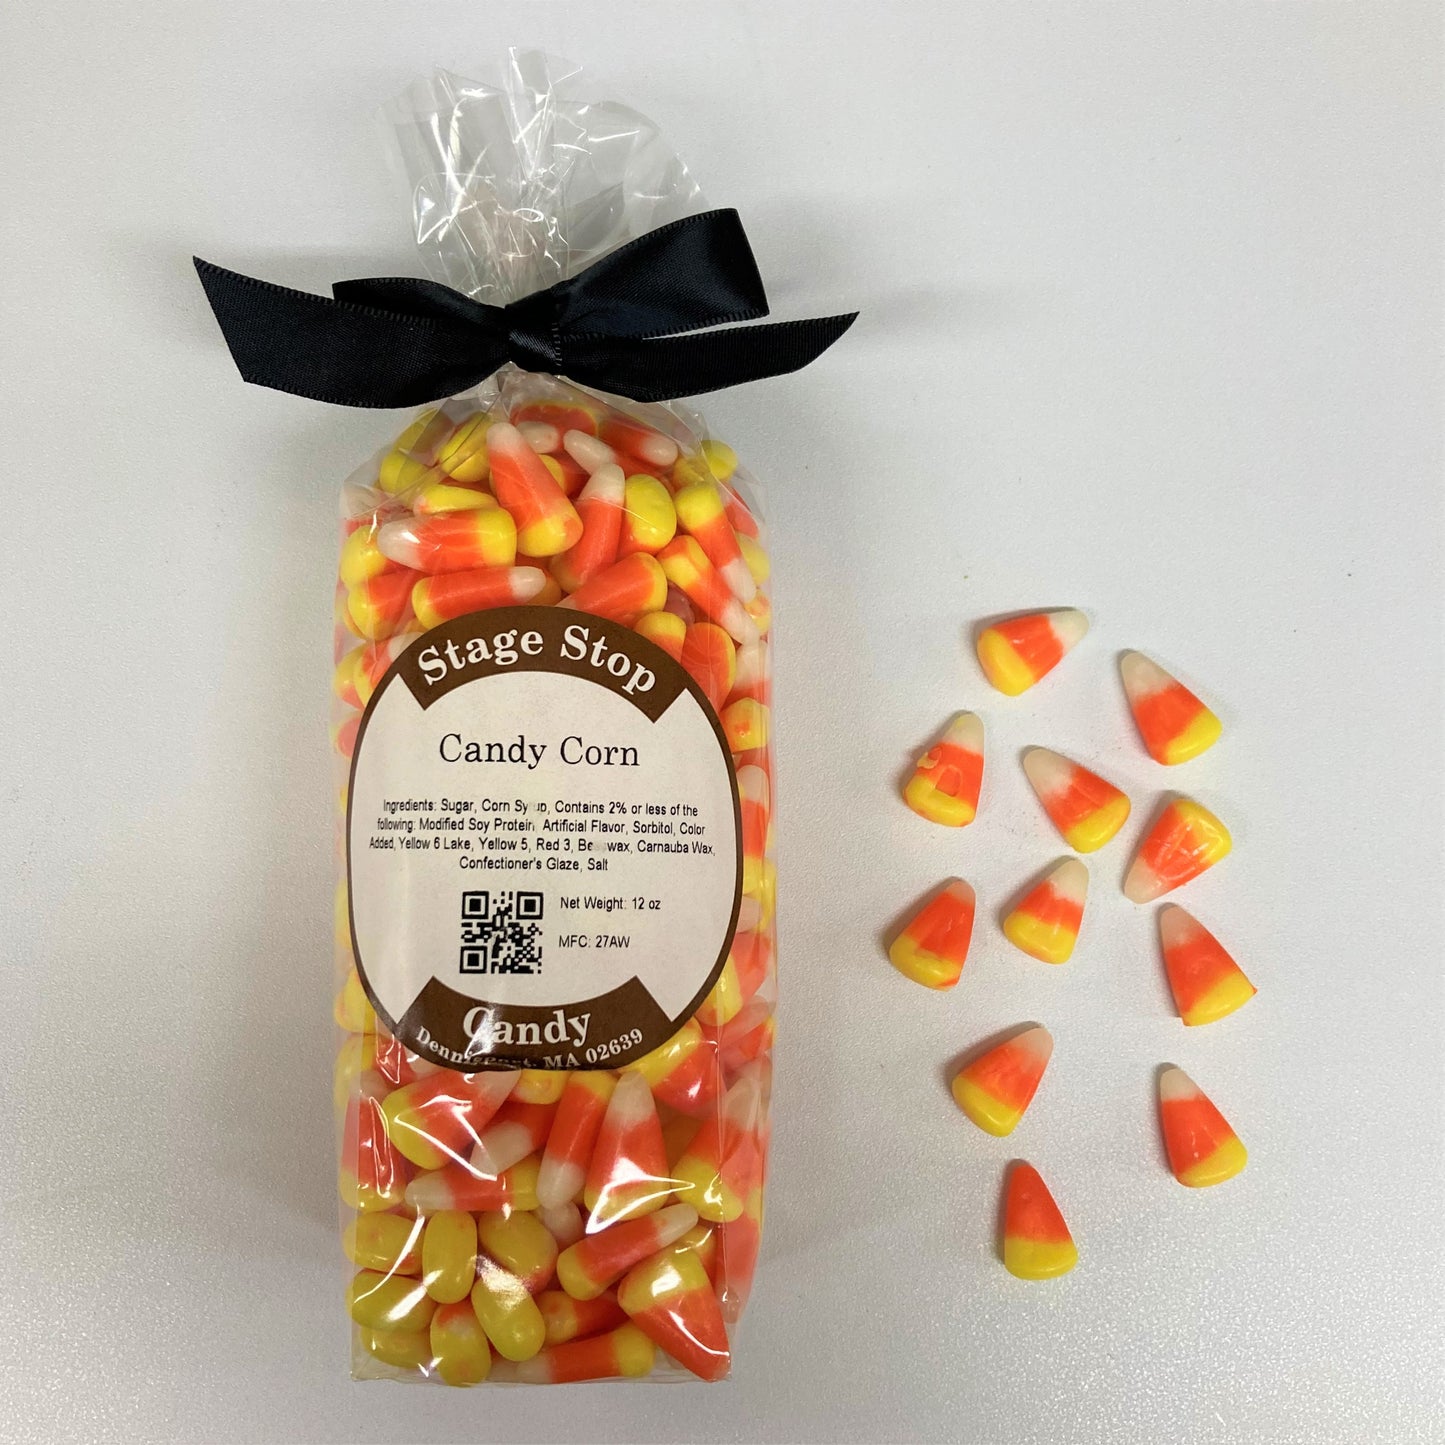 Bag of Candy Corn from Stage Stop Candy